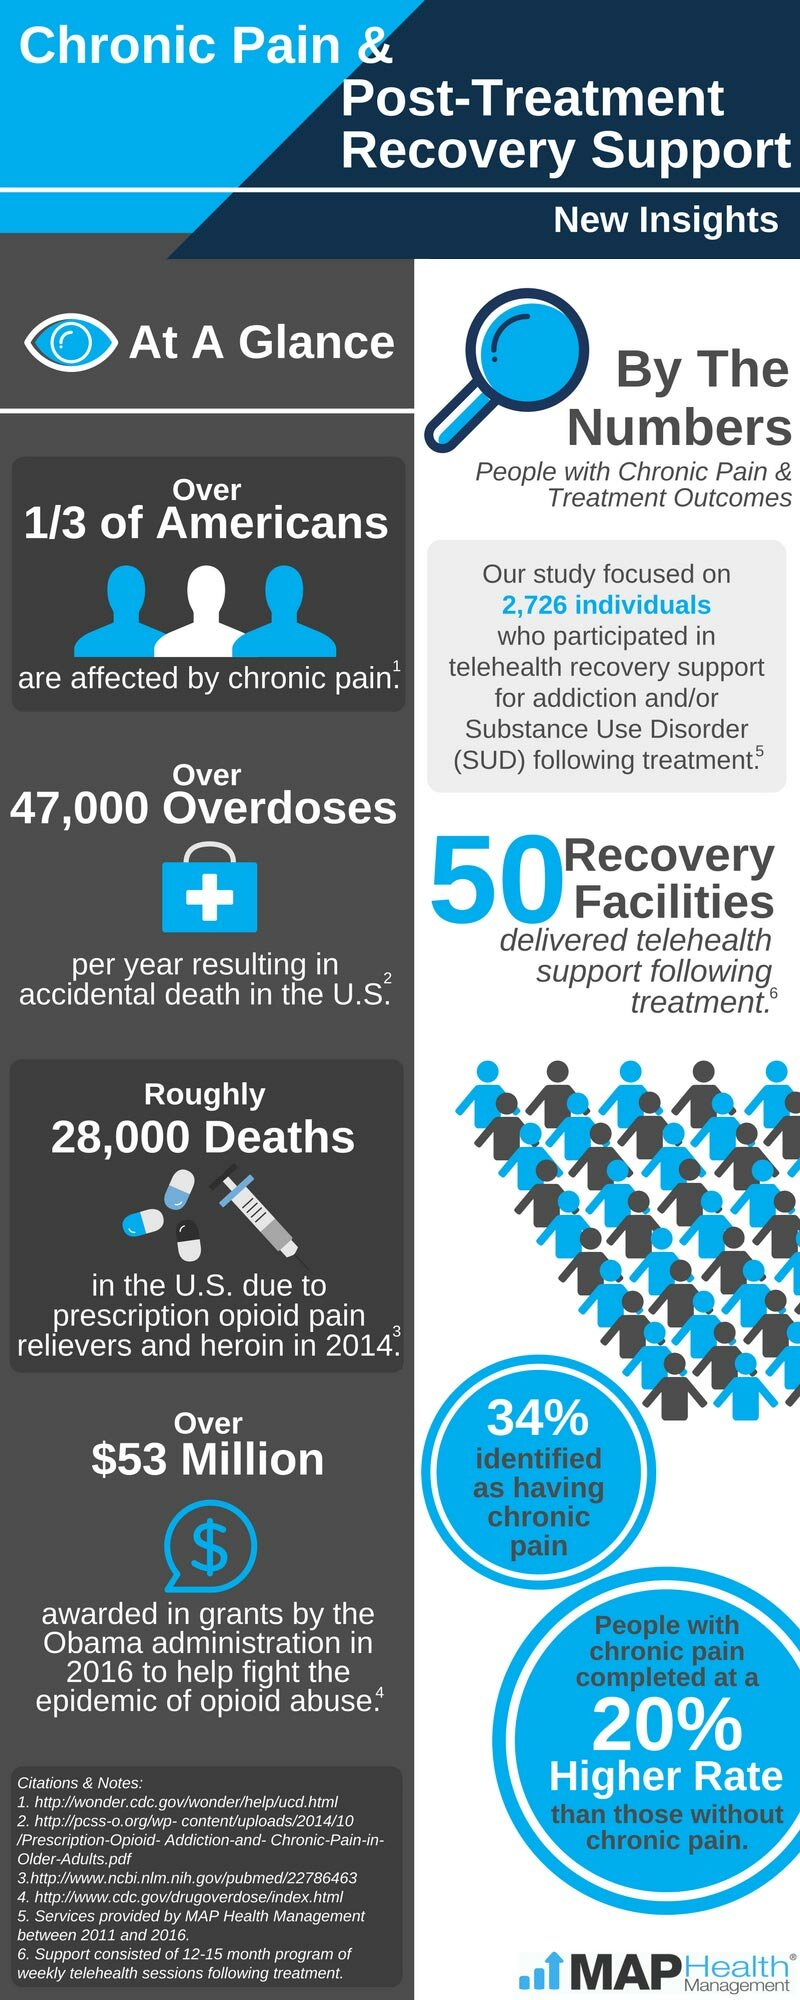 Chronic Pain & Post-Treatment Recovery Support